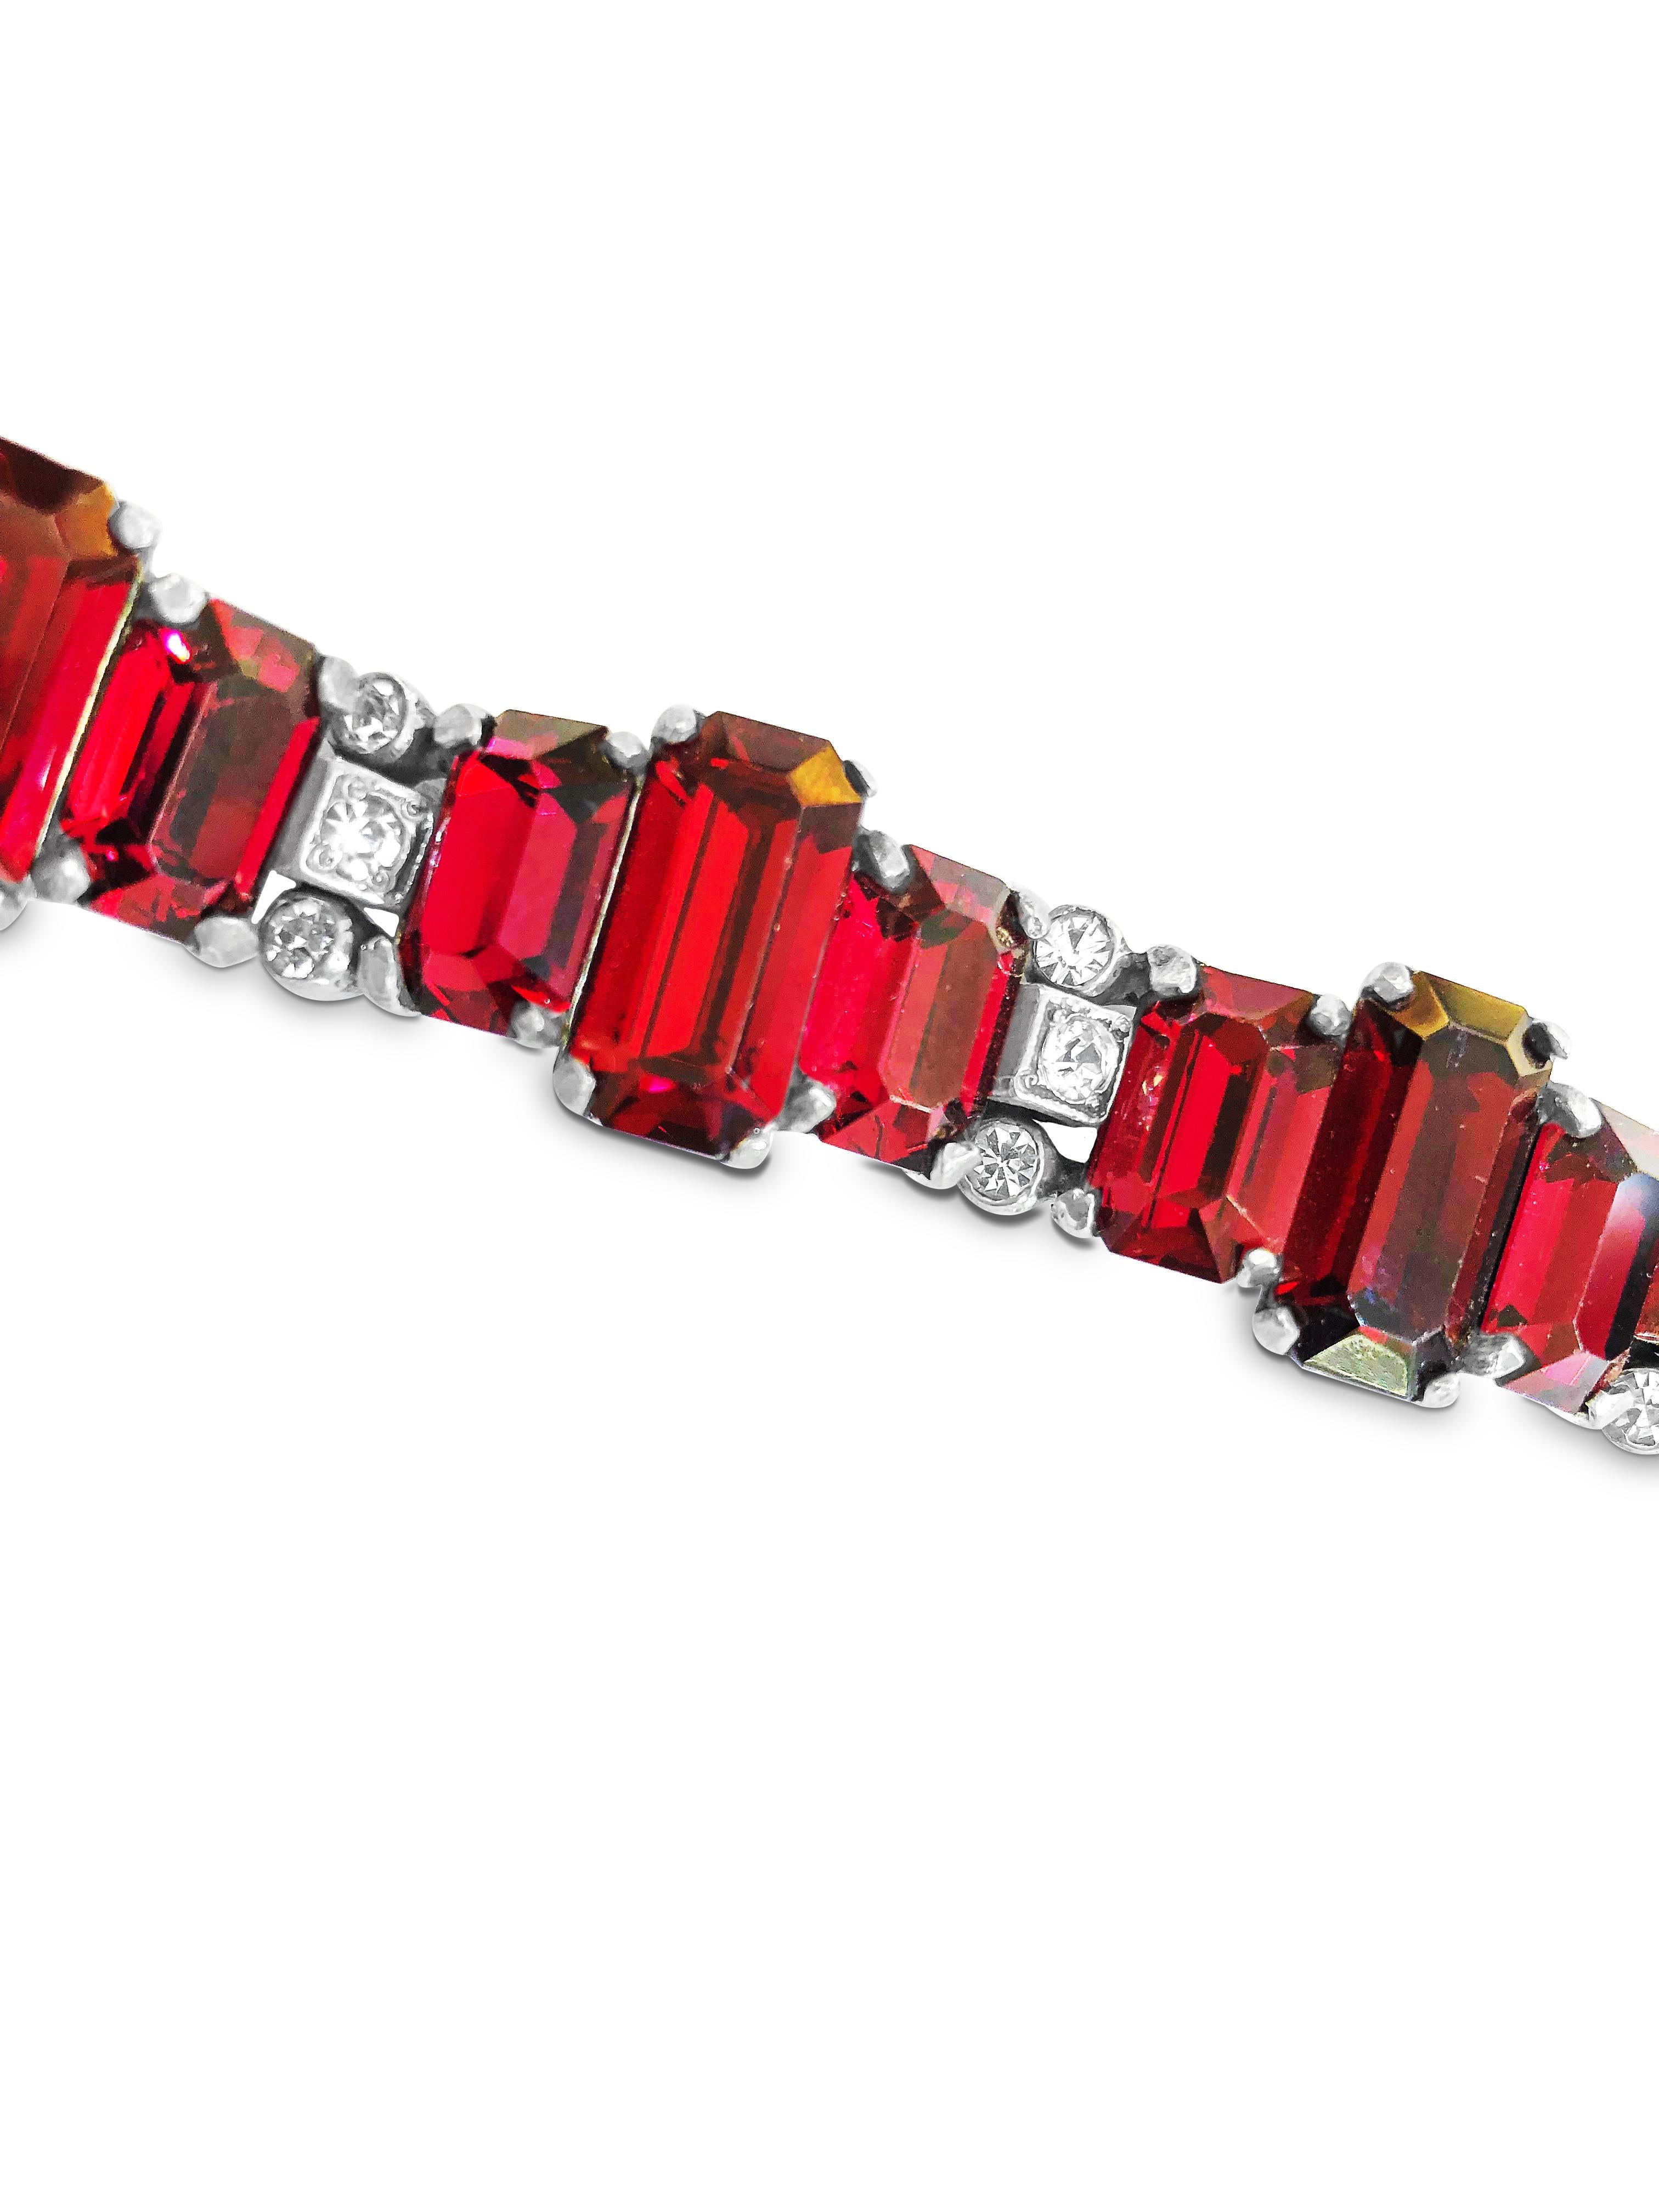 Eisenberg
Vintage 
Length= 6 1/2 inches
Width= 1/2 inches 
Red stone sizes=  16mm x 8mm
Stone reds 11mm x 8mm 